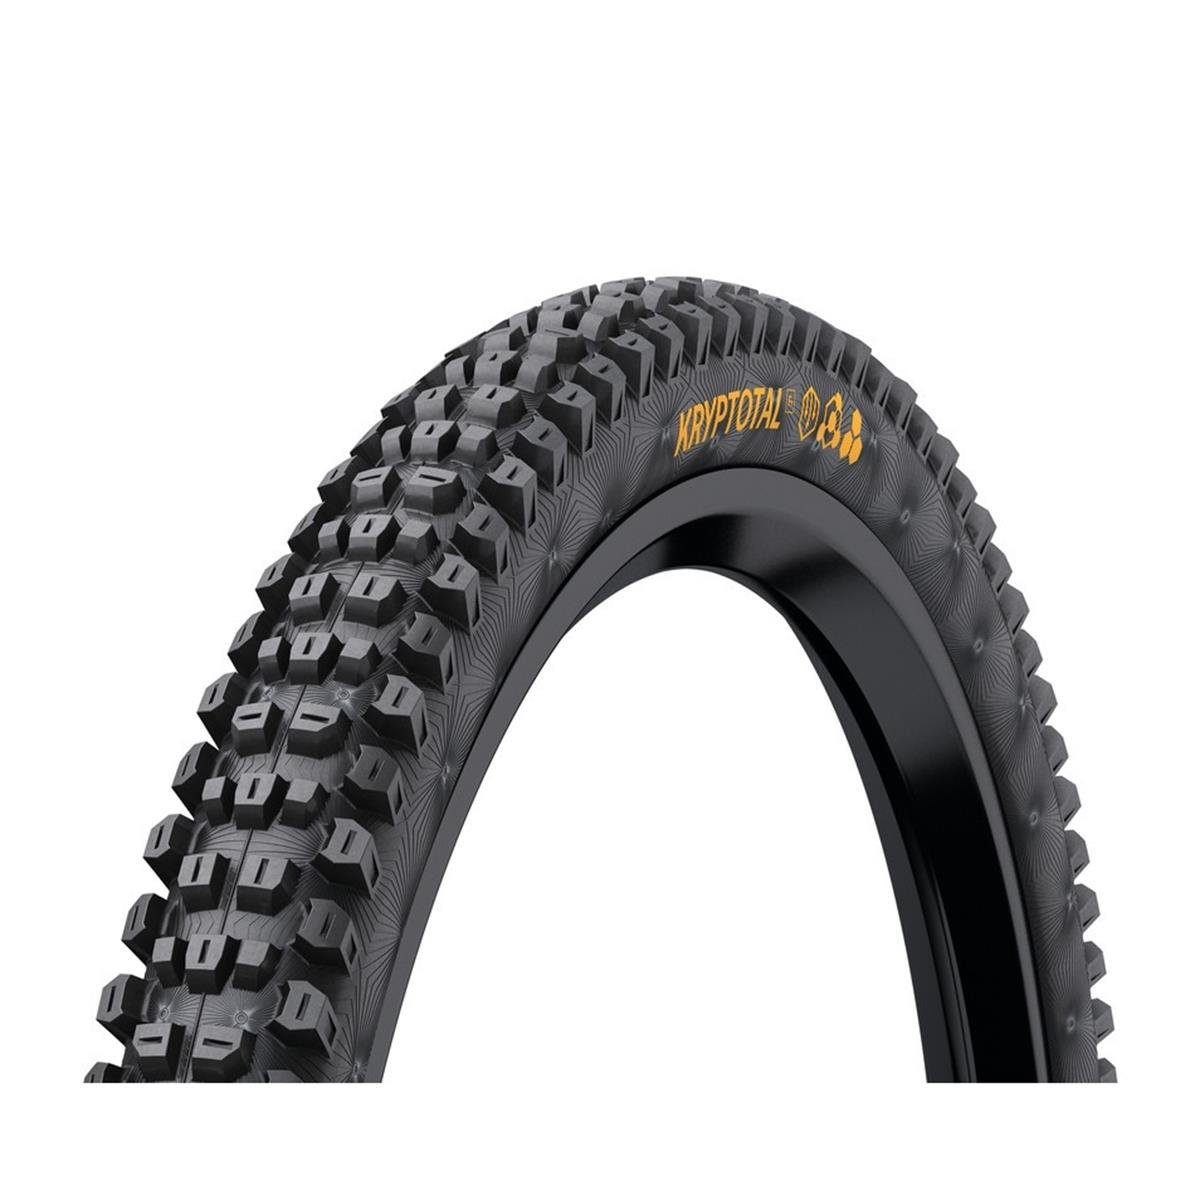 Continental MTB Tire Kryptotal Front Trail 27.5 x 2.4, Trail-Casing, Endurance-Compound, TR